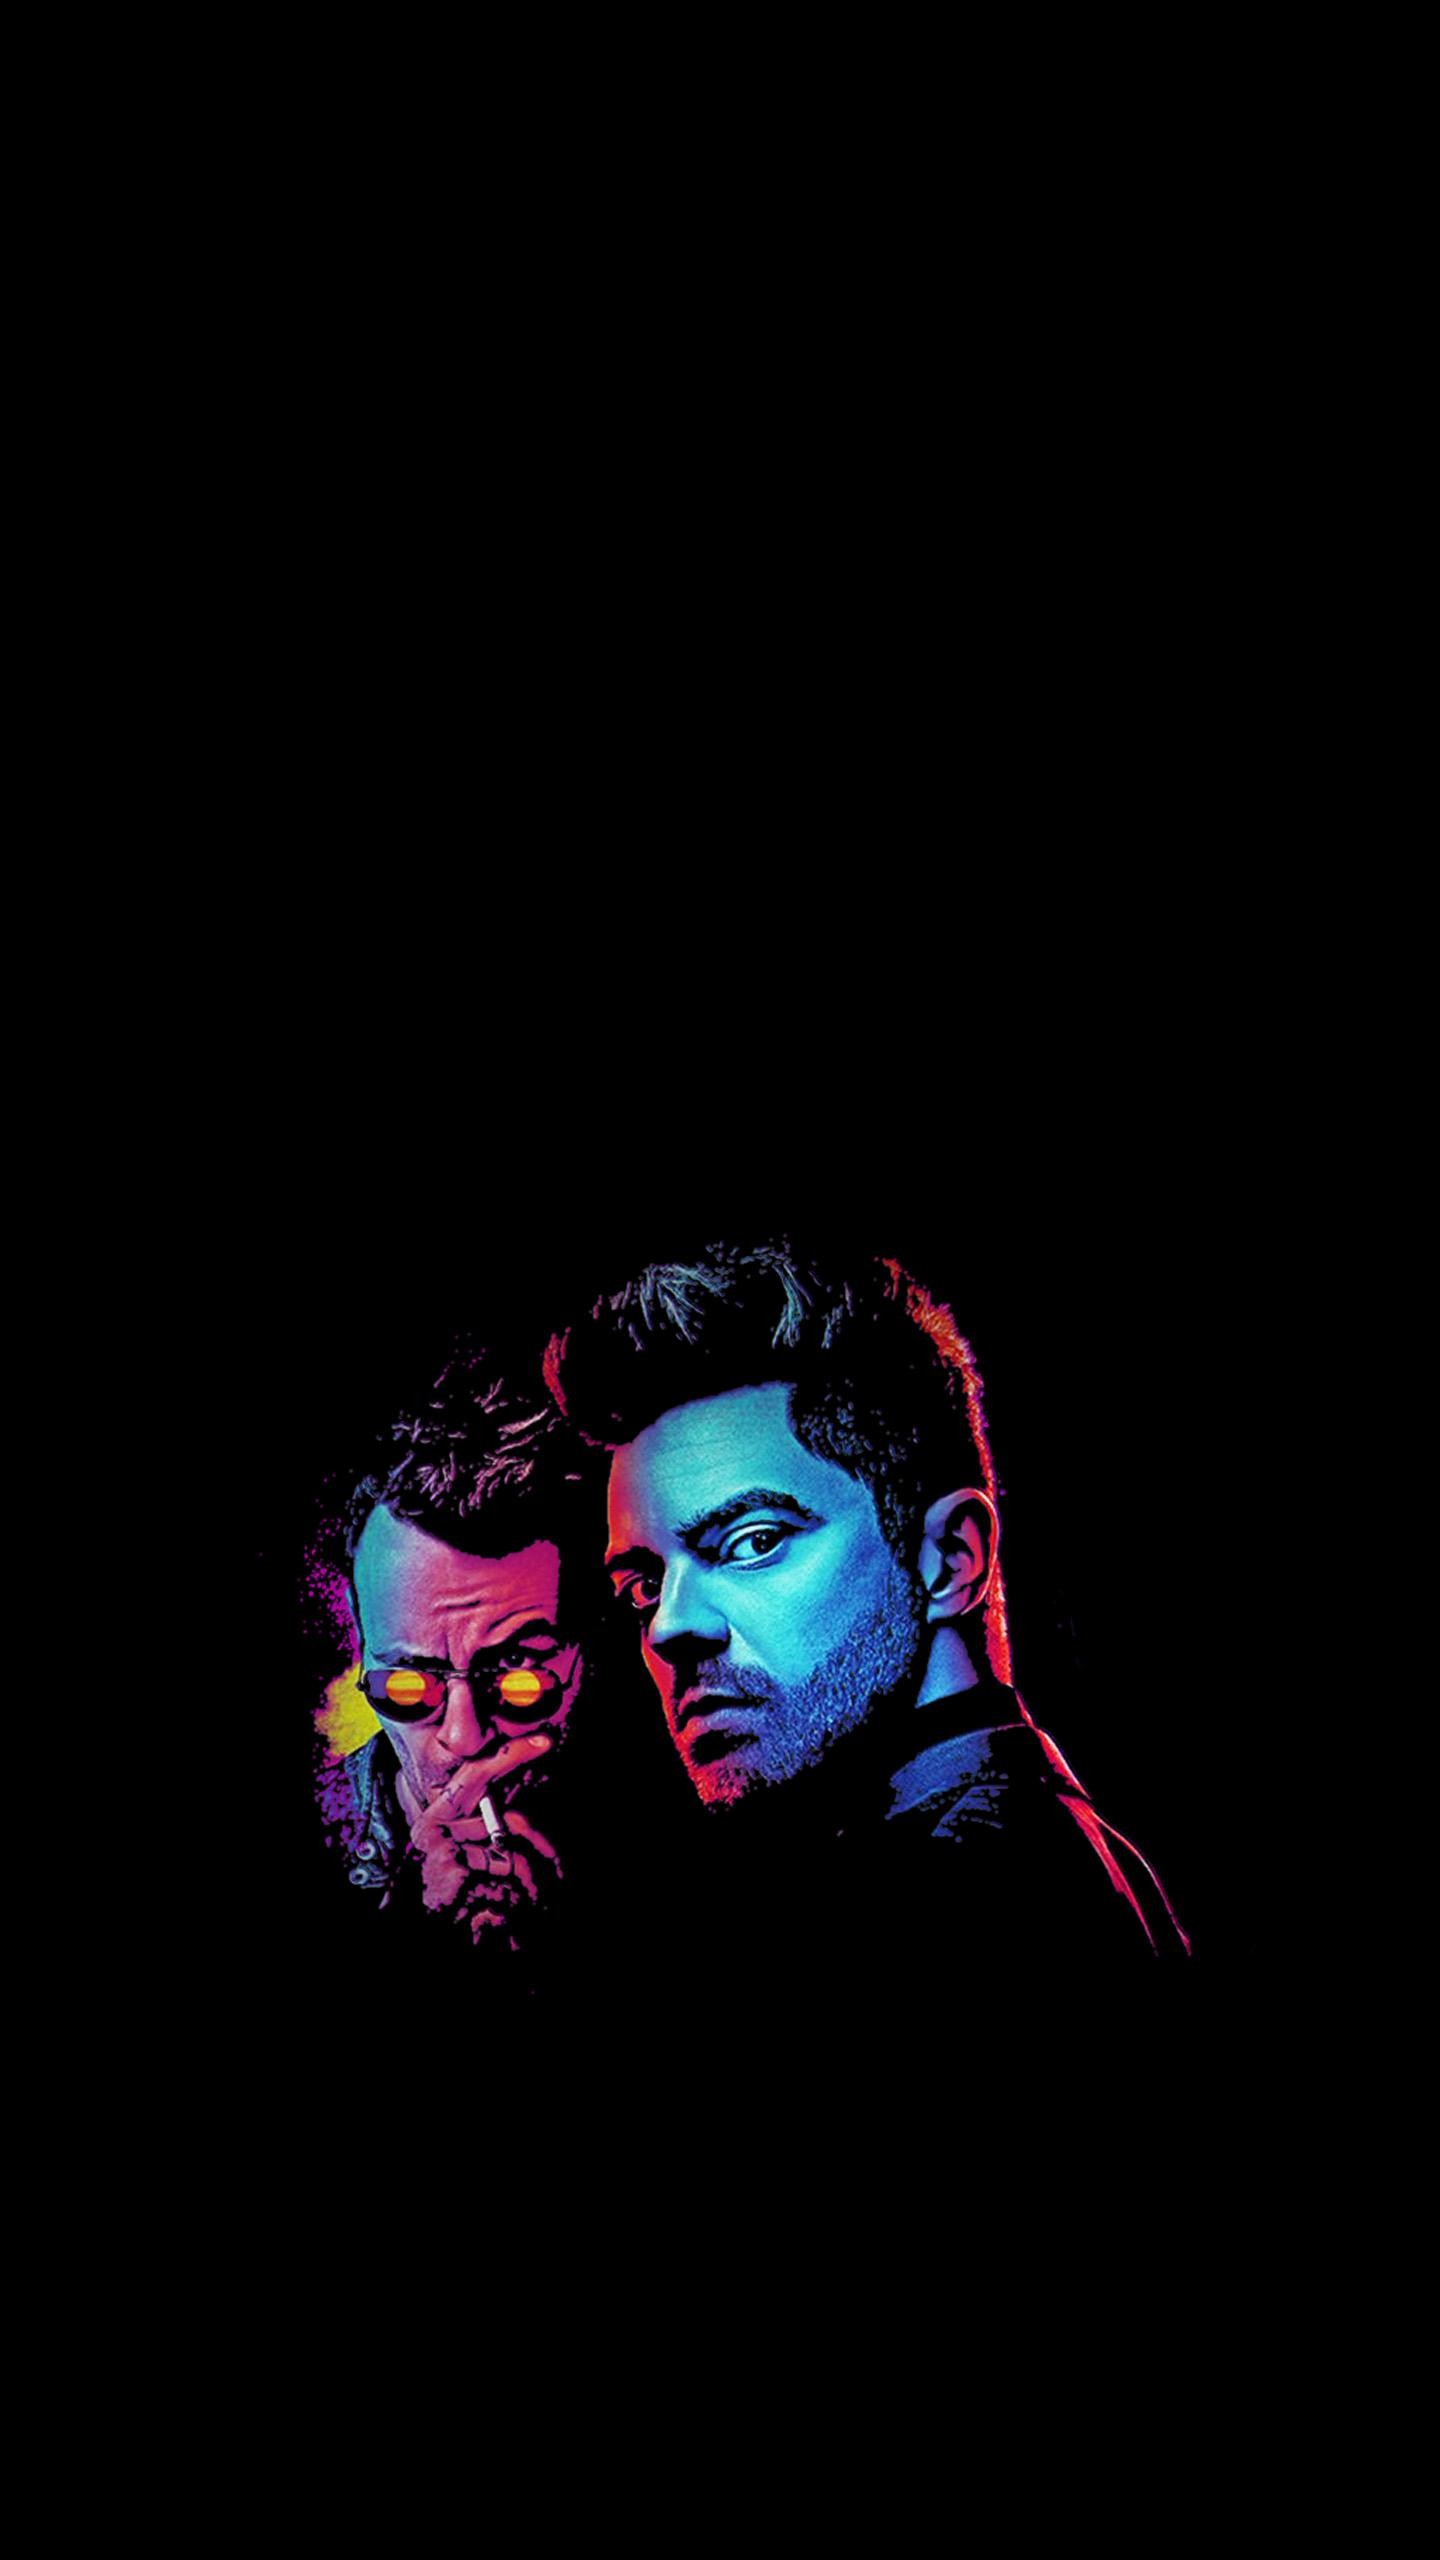 1440x2560 Made this Preacher wallpaper, thought some of you might like it.